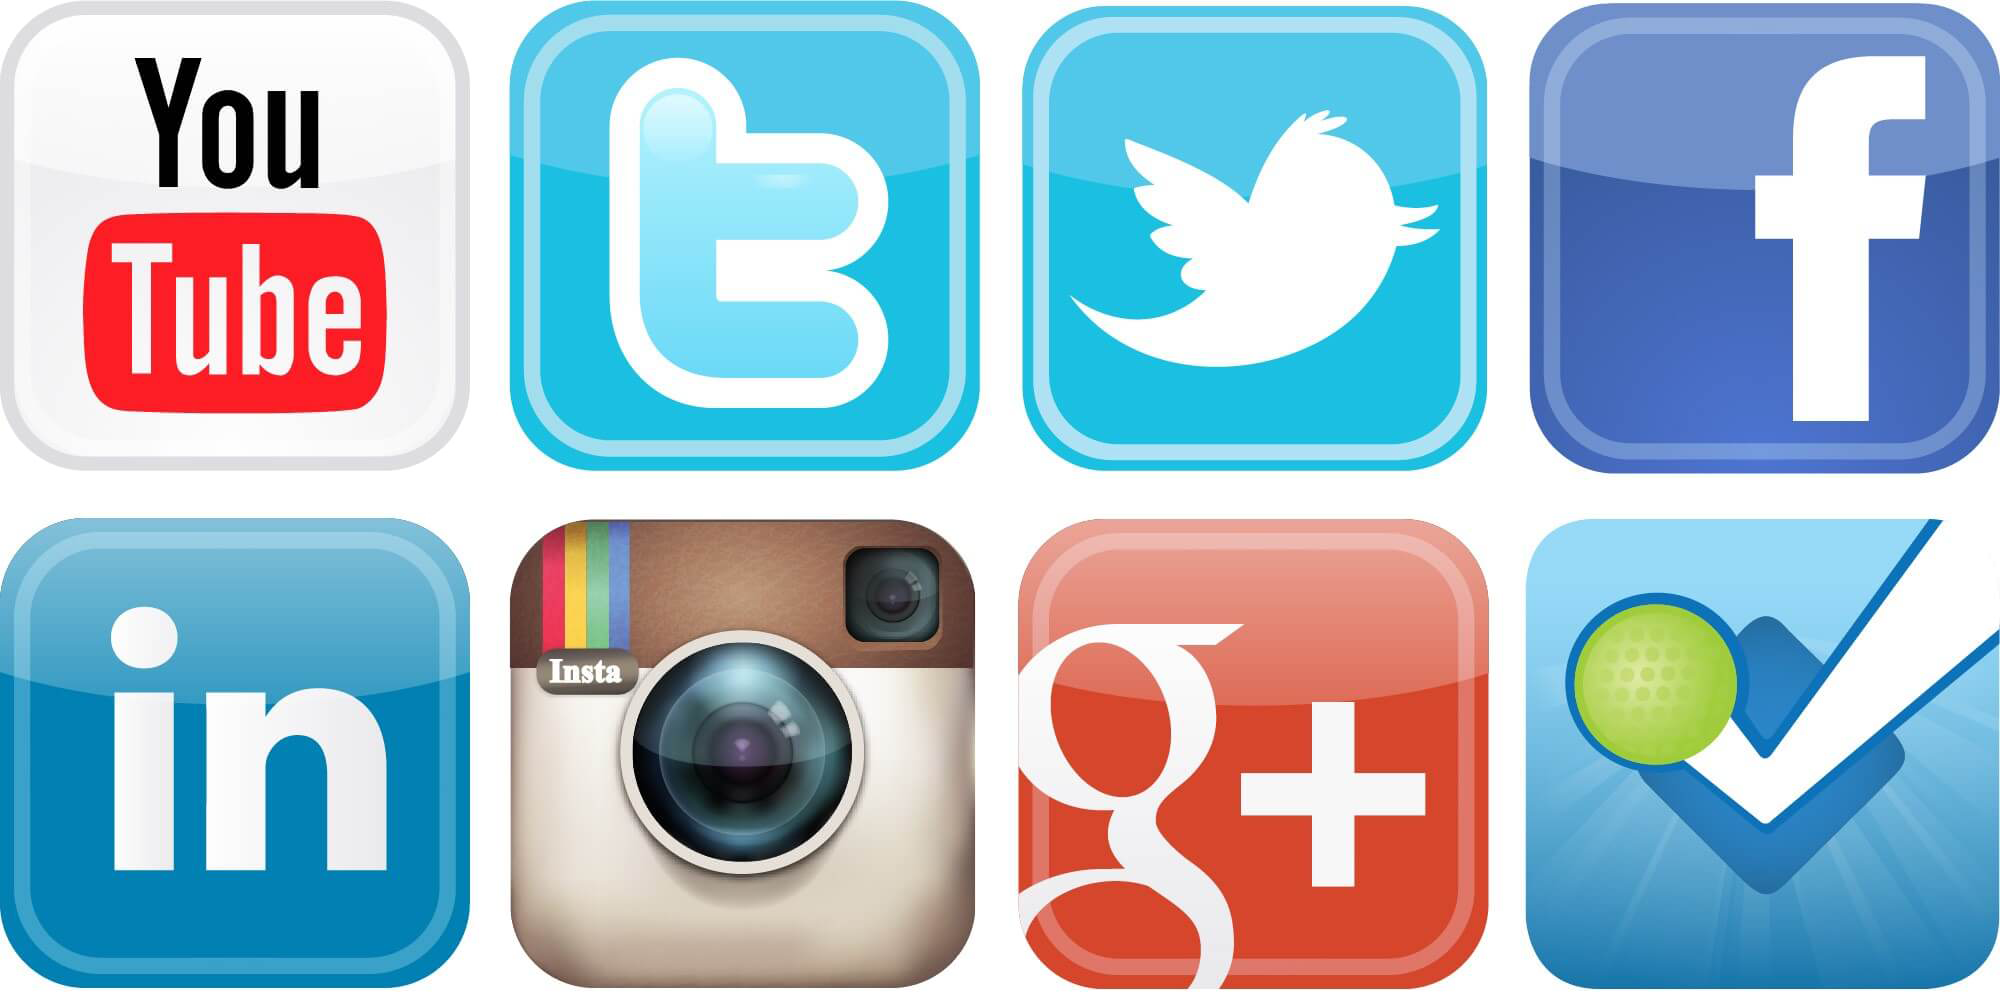 social media icons png free download